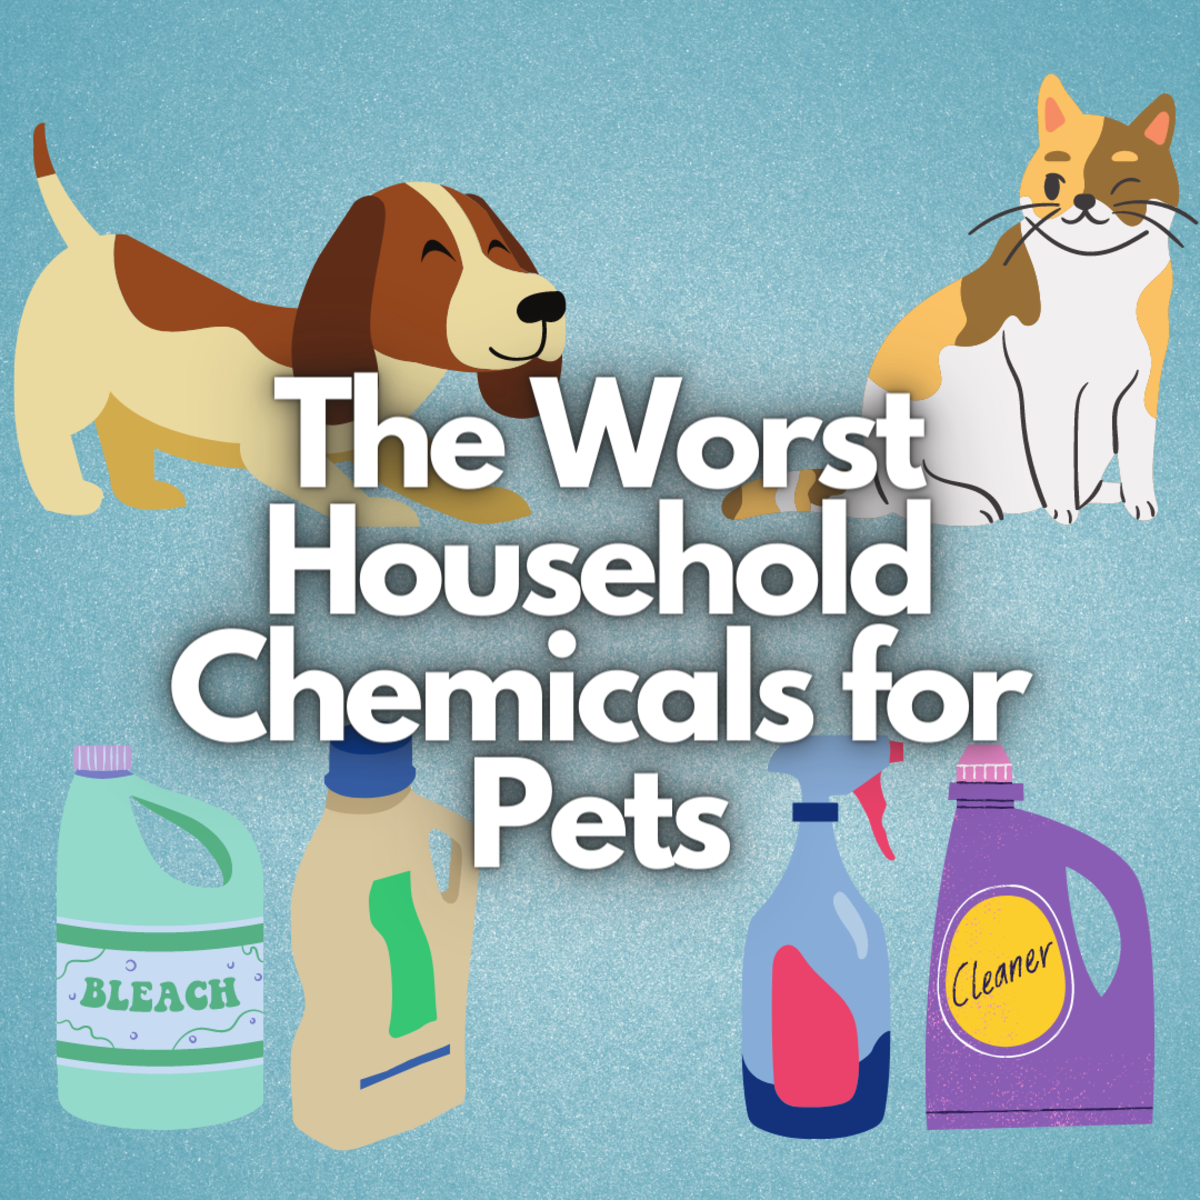 Read on to learn about some of the worst household chemicals for pets. This article will help you better pet-proof your home and ensure safety for your little friends.